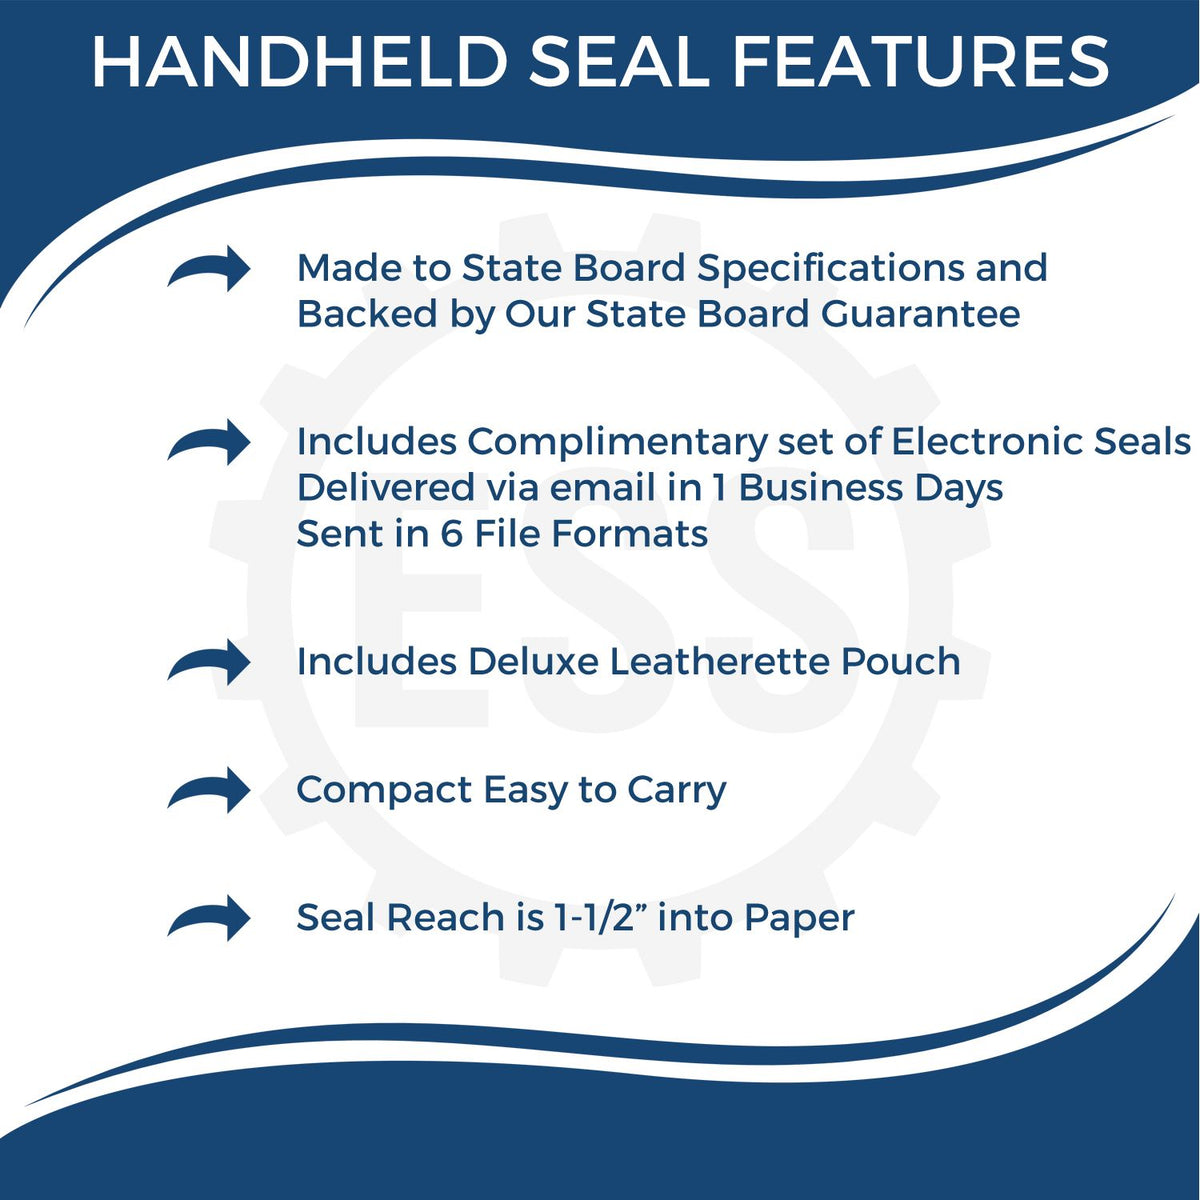 A picture of an infographic highlighting the selling points for the Handheld Alaska Land Surveyor Seal